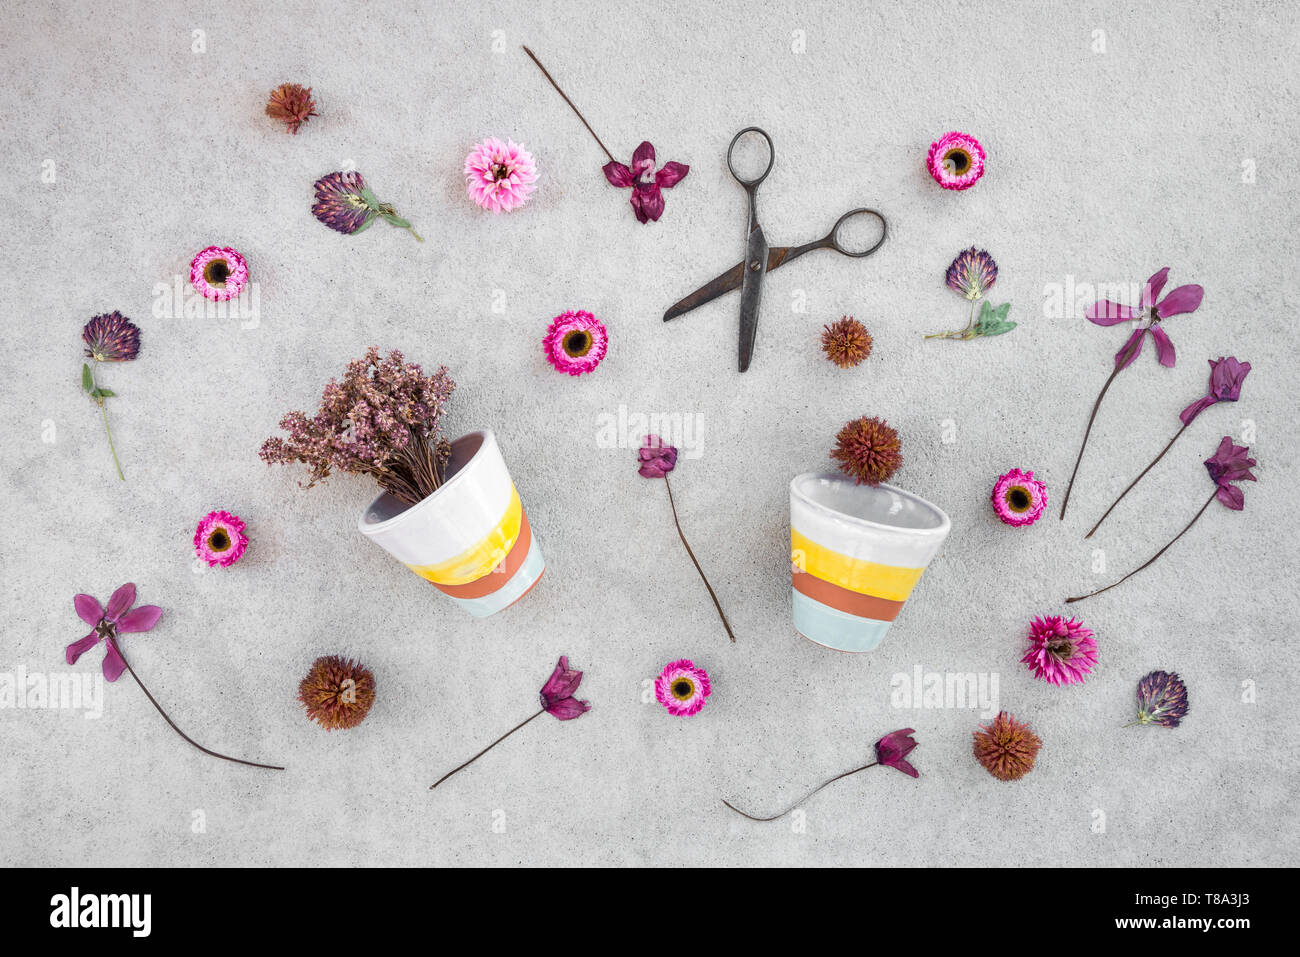 Pink flowers, rusty scissors and ceramic flowerpots on gray concrete background. Stock Photo